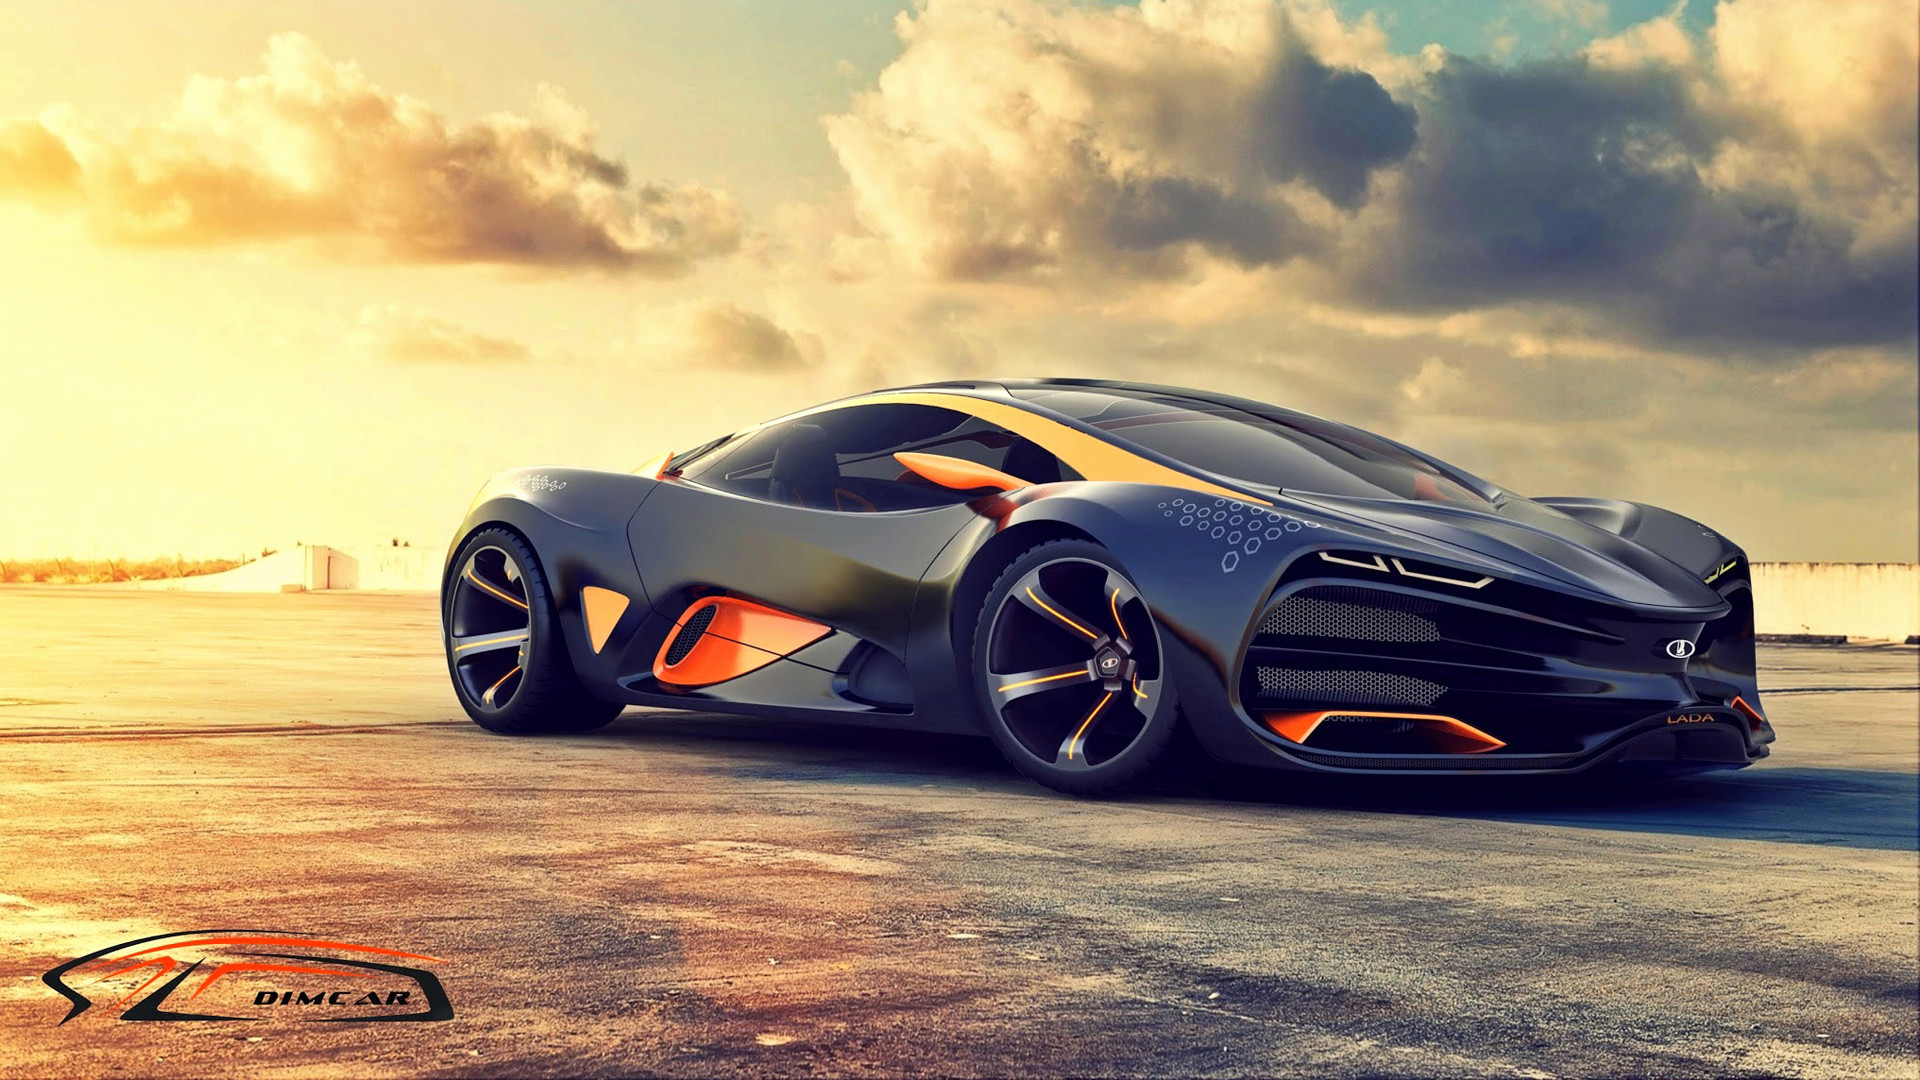 1920x1080 Hd Car Wallpapers Awesome 2015 Lada Raven Supercar Concept 2 Wallpaper Hd  Car Wallpapers